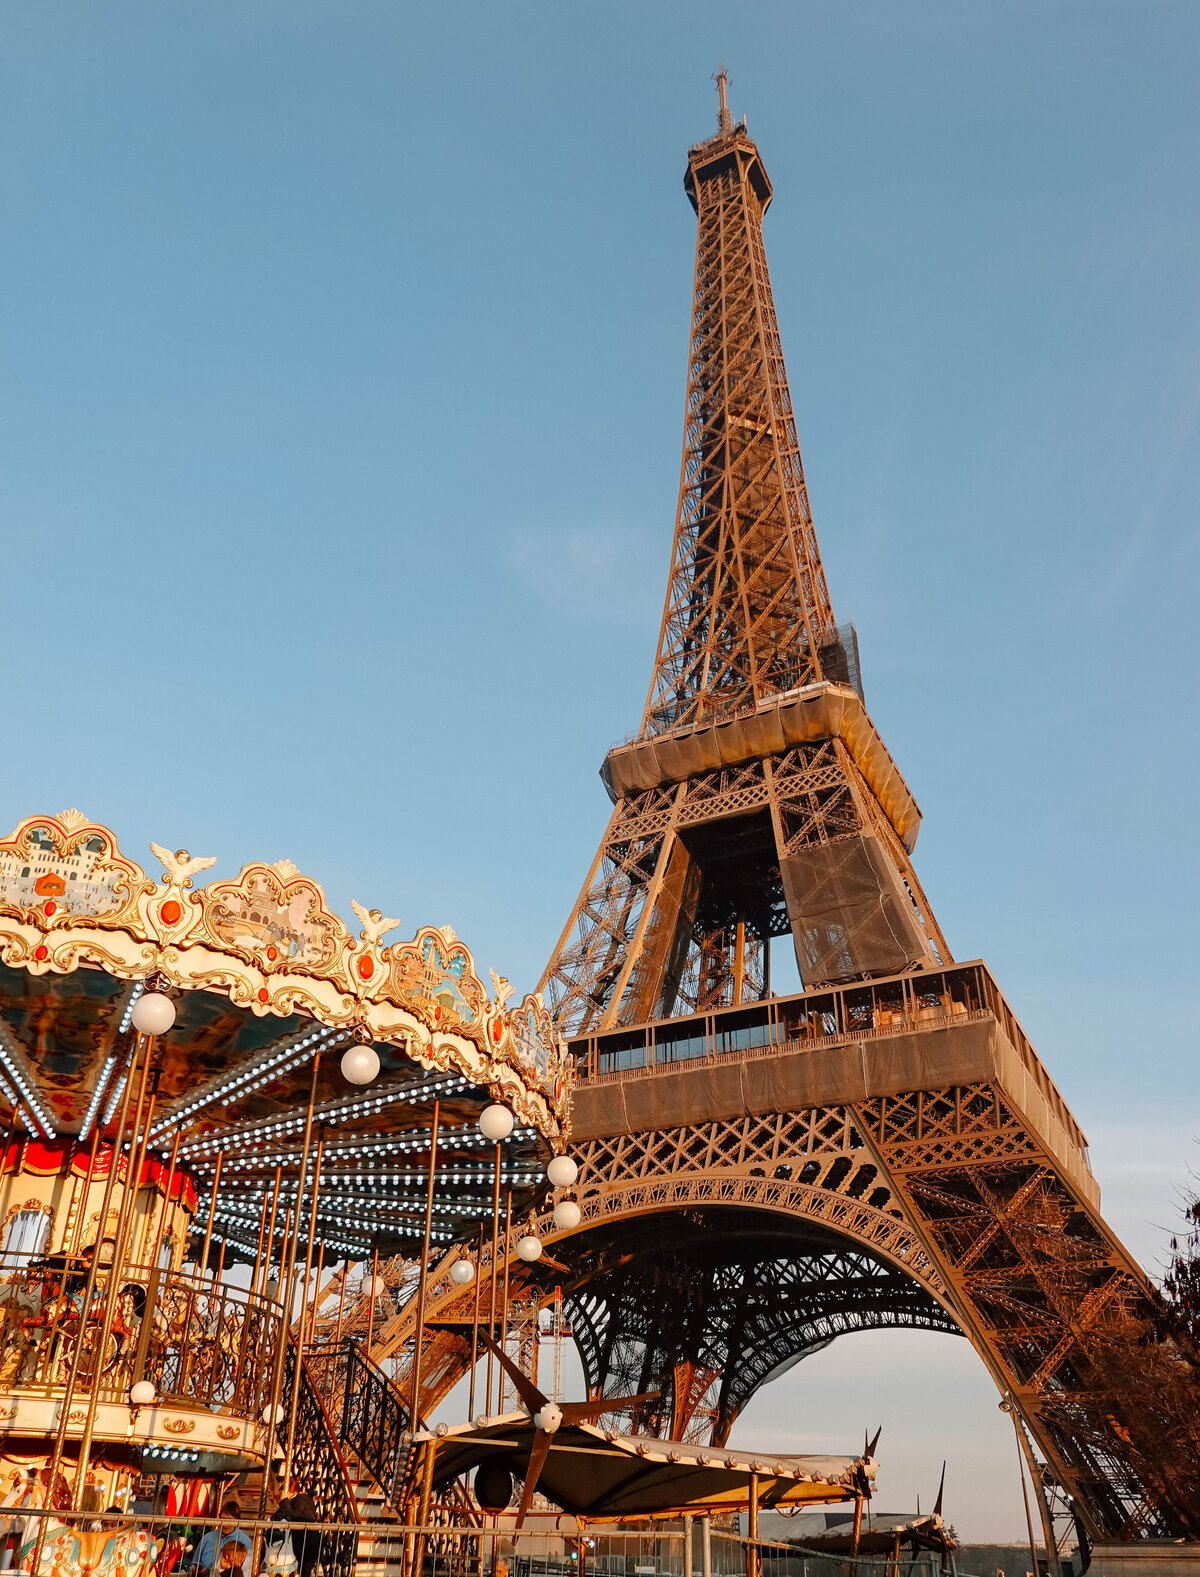 the Eiffel Tower by the carousel